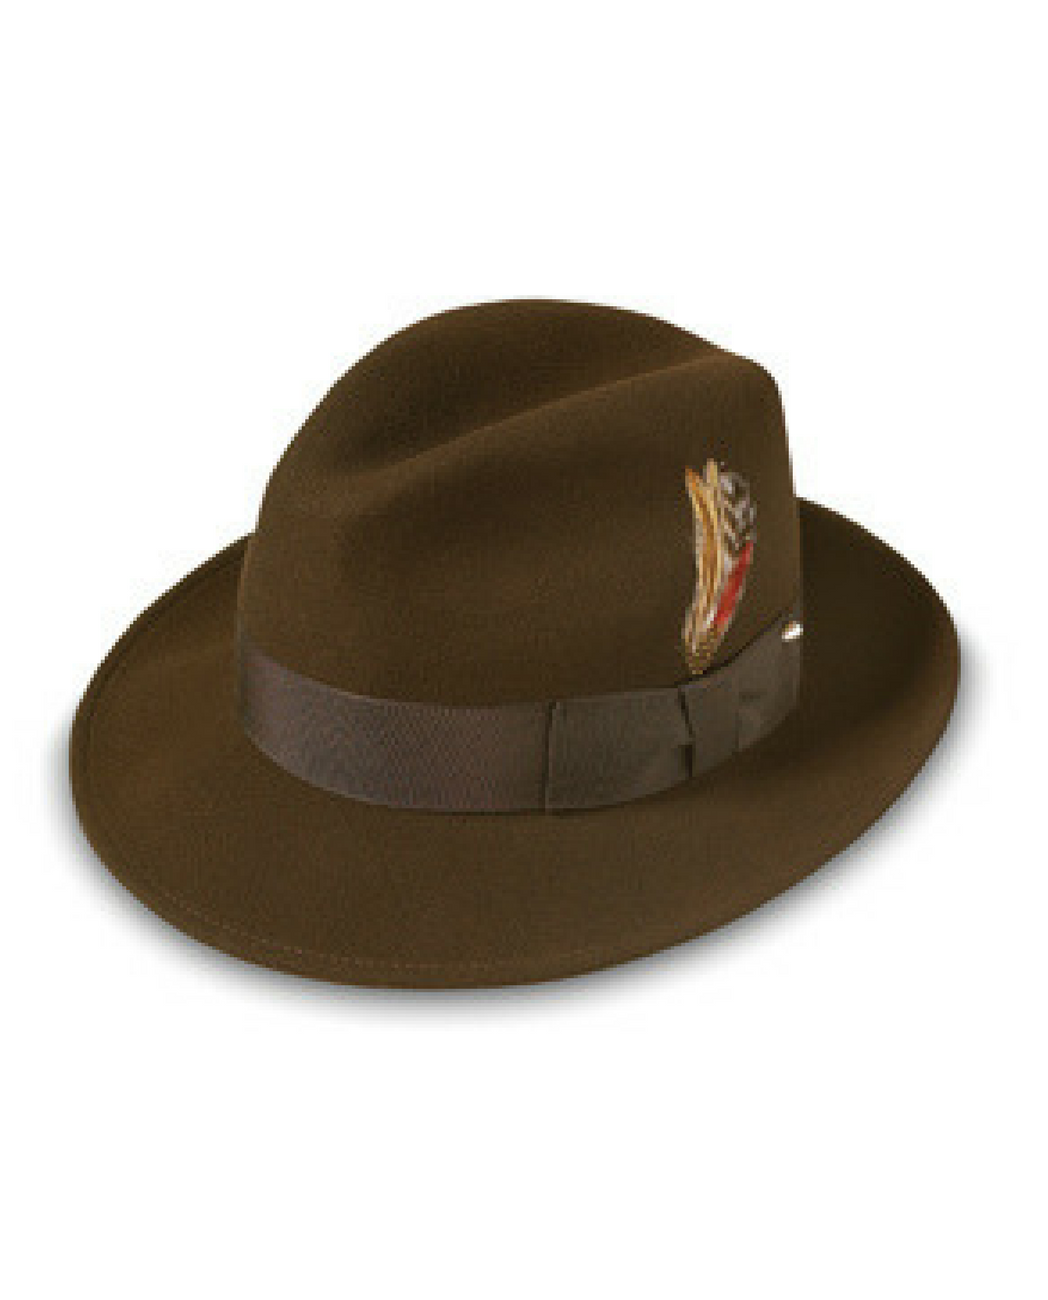 A brown fedora with a brown hatband, accented with a small feather.